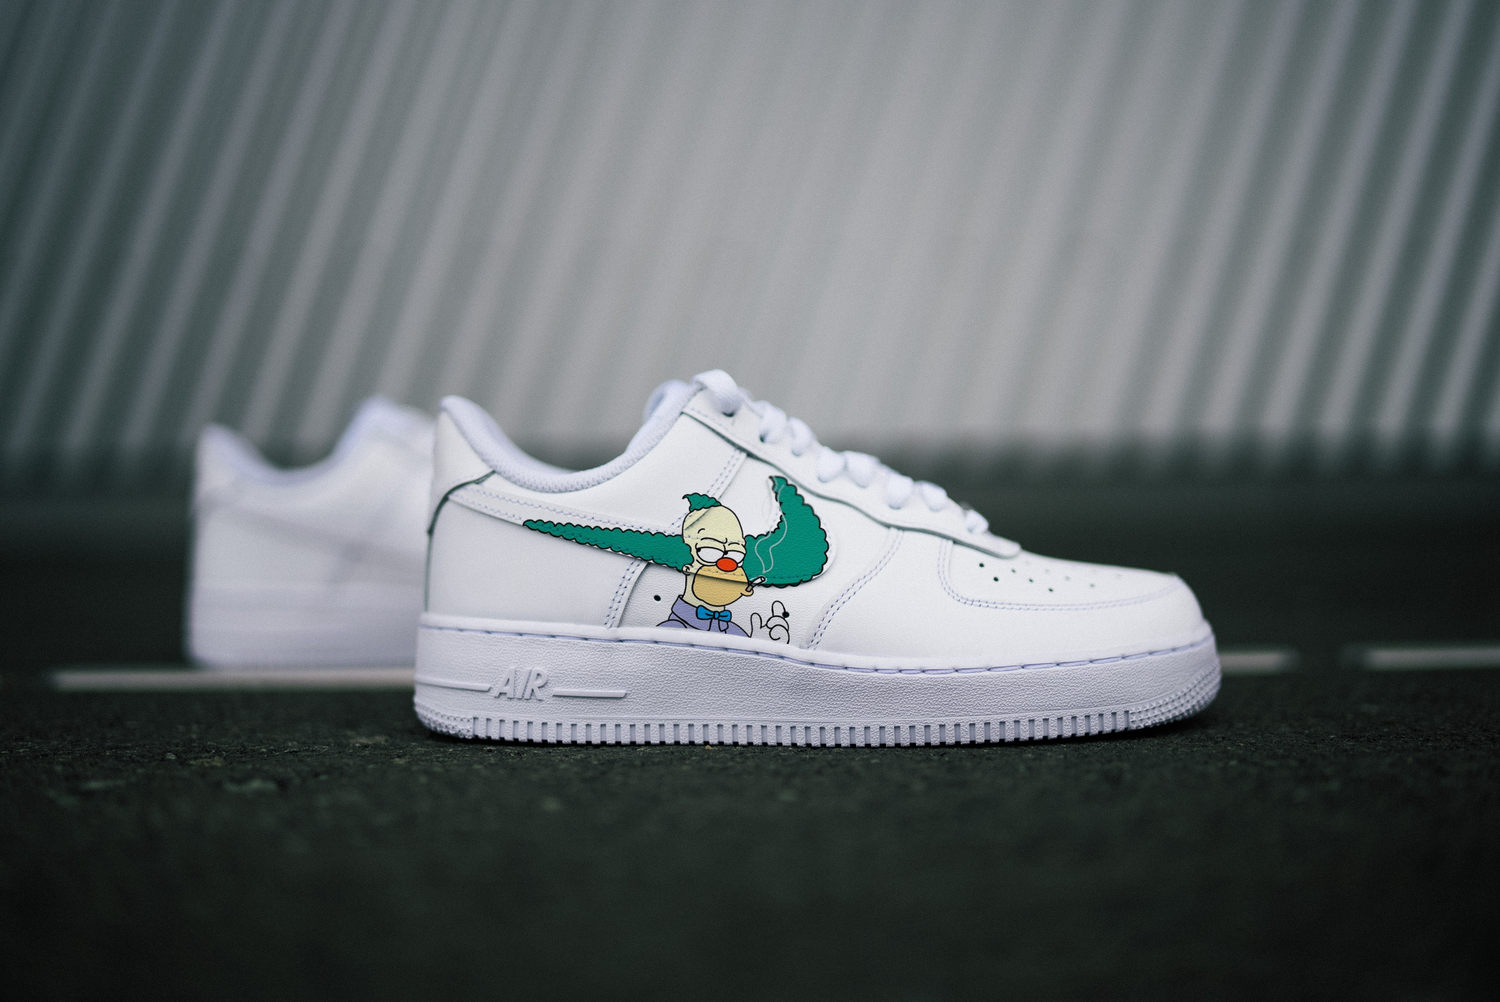 The image is featuring a Custom Nike Air force 1 sneakers on a gray asphalt background. On the side of the sneaker is a design of krusty the clown from simpsons.